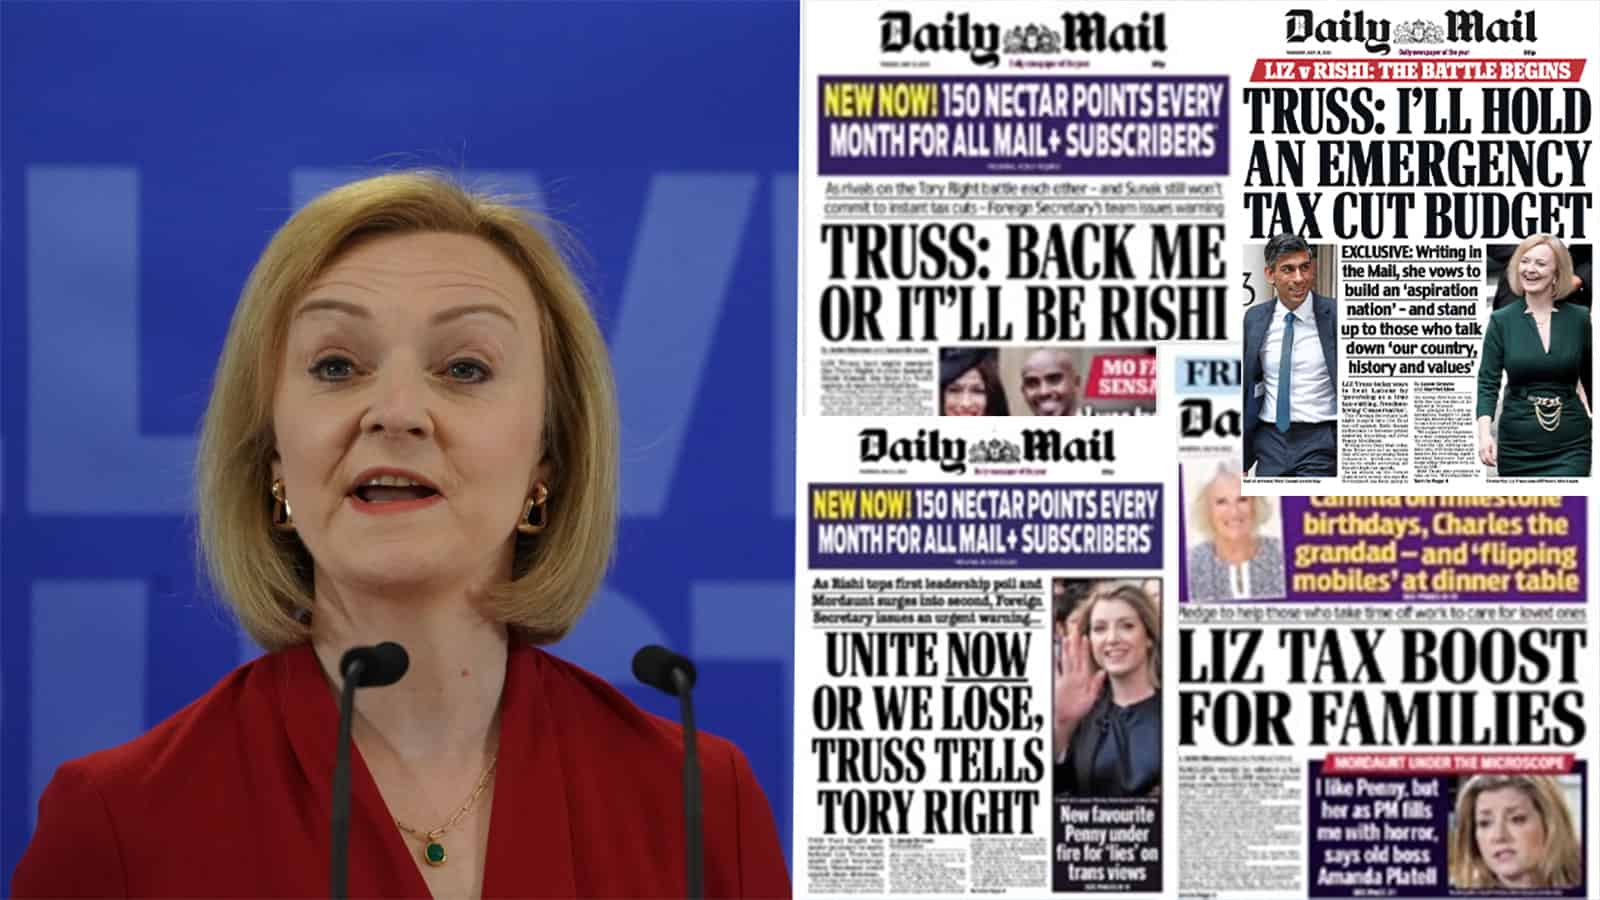 Questions raised over Daily Mail’s Liz Truss coverage